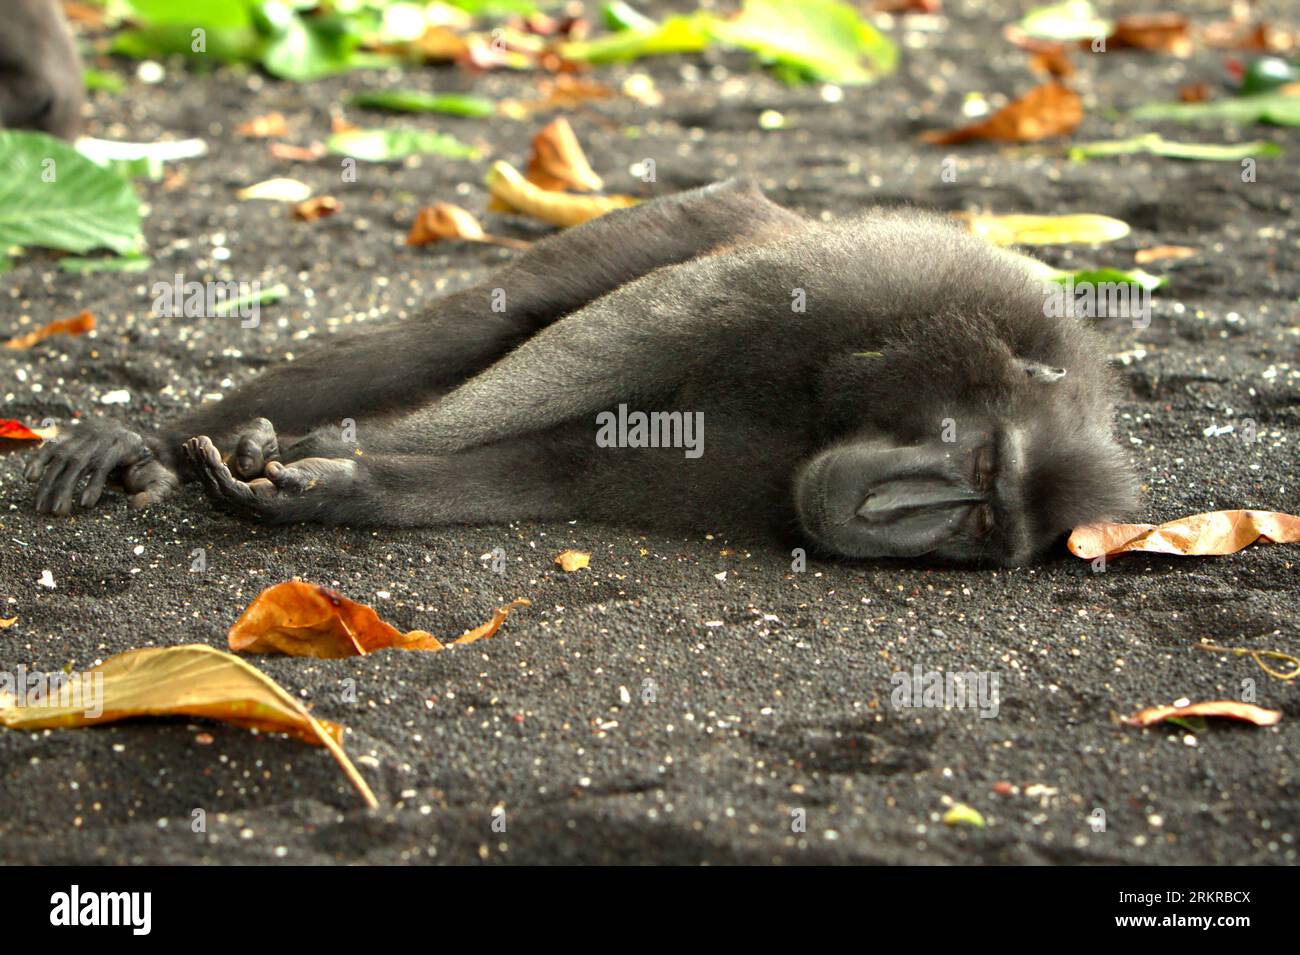 A Celebes black-crested macaque (Macaca nigra) takes a nap during a resting time on a beach in Tangkoko forest, North Sulawesi, Indonesia. Climate change and disease are emerging threats to primates, while crested macaque belongs to the 10% of primate species that are highly vulnerable to droughts, according to primate scientists. A recent report revealed that the temperature is indeed increasing in Tangkoko forest, and the overall fruit abundance decreased. Stock Photo